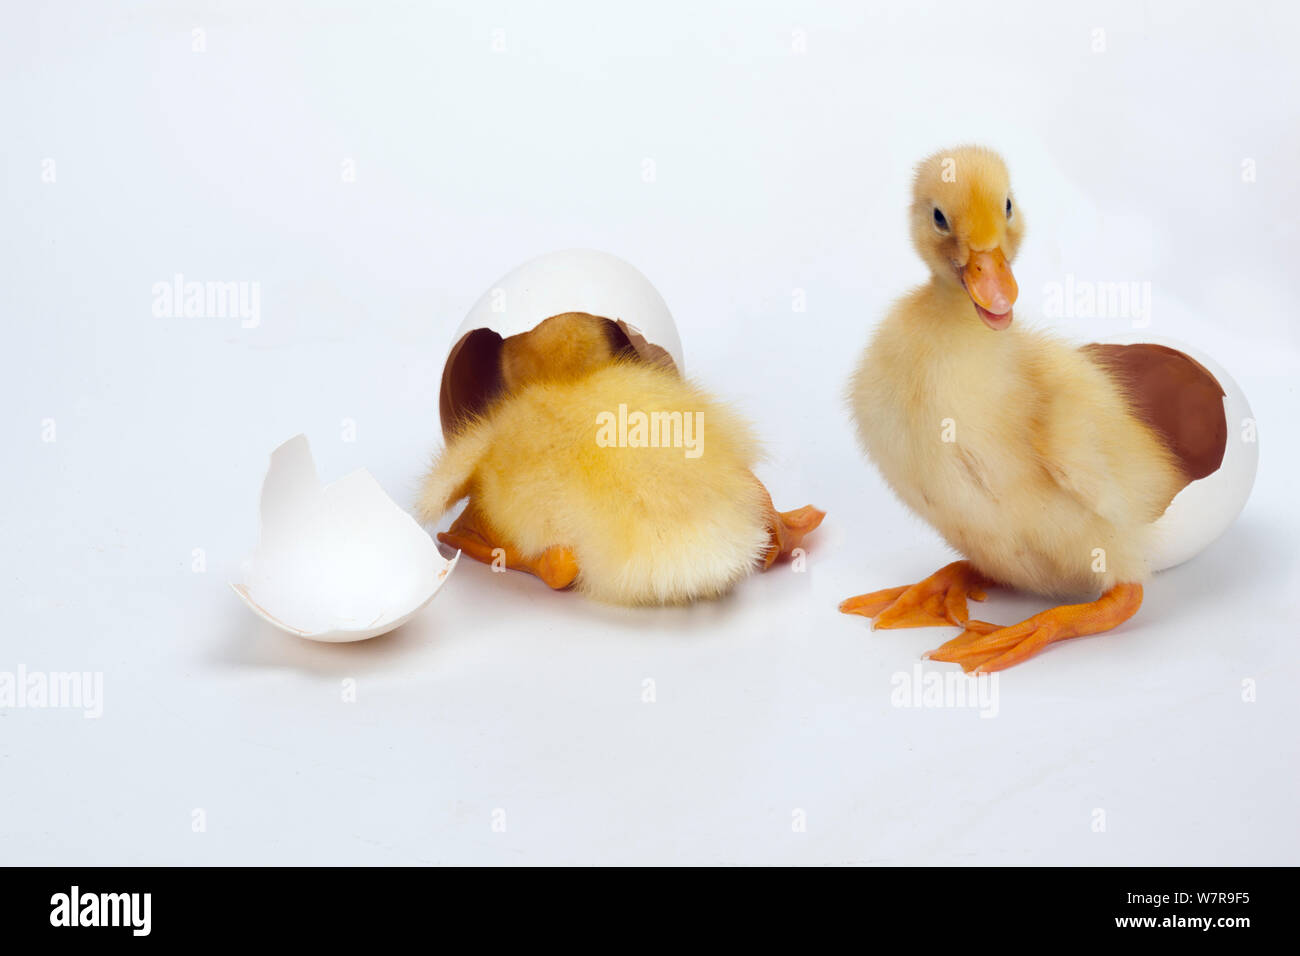 Newly hatched ducklings with eggs. Stock Photo